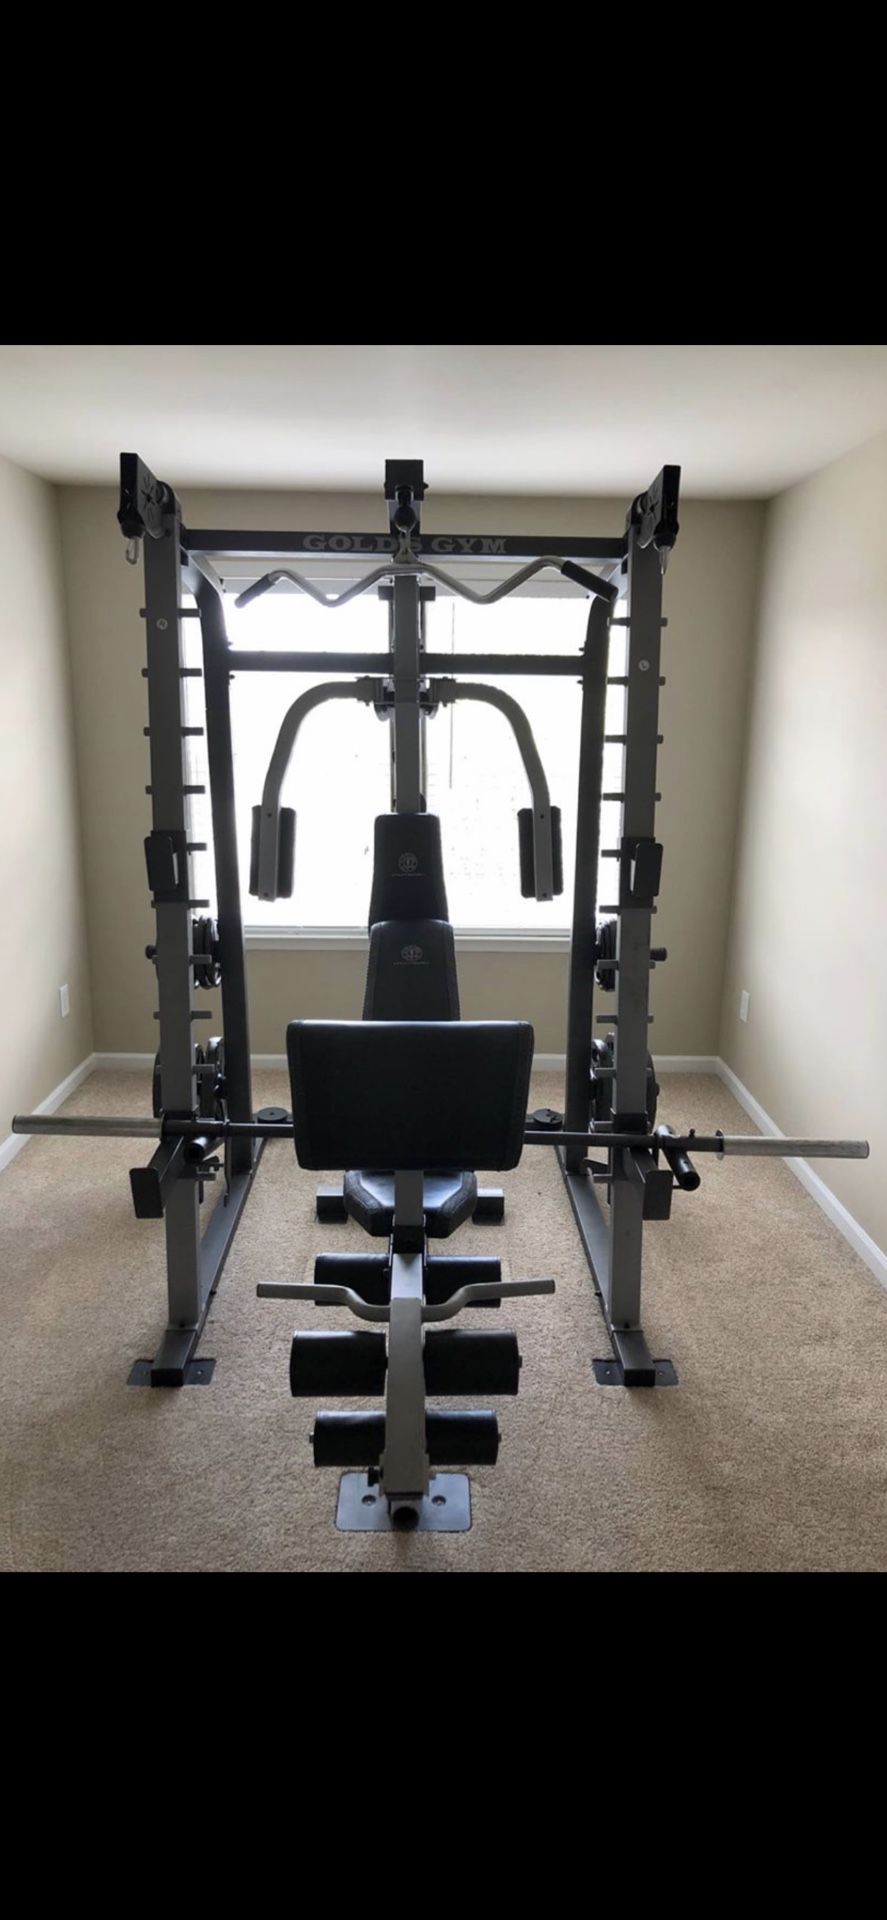 Gold’s Gym Platinum Smith Machine, adjustable bench included. (complete home gym)